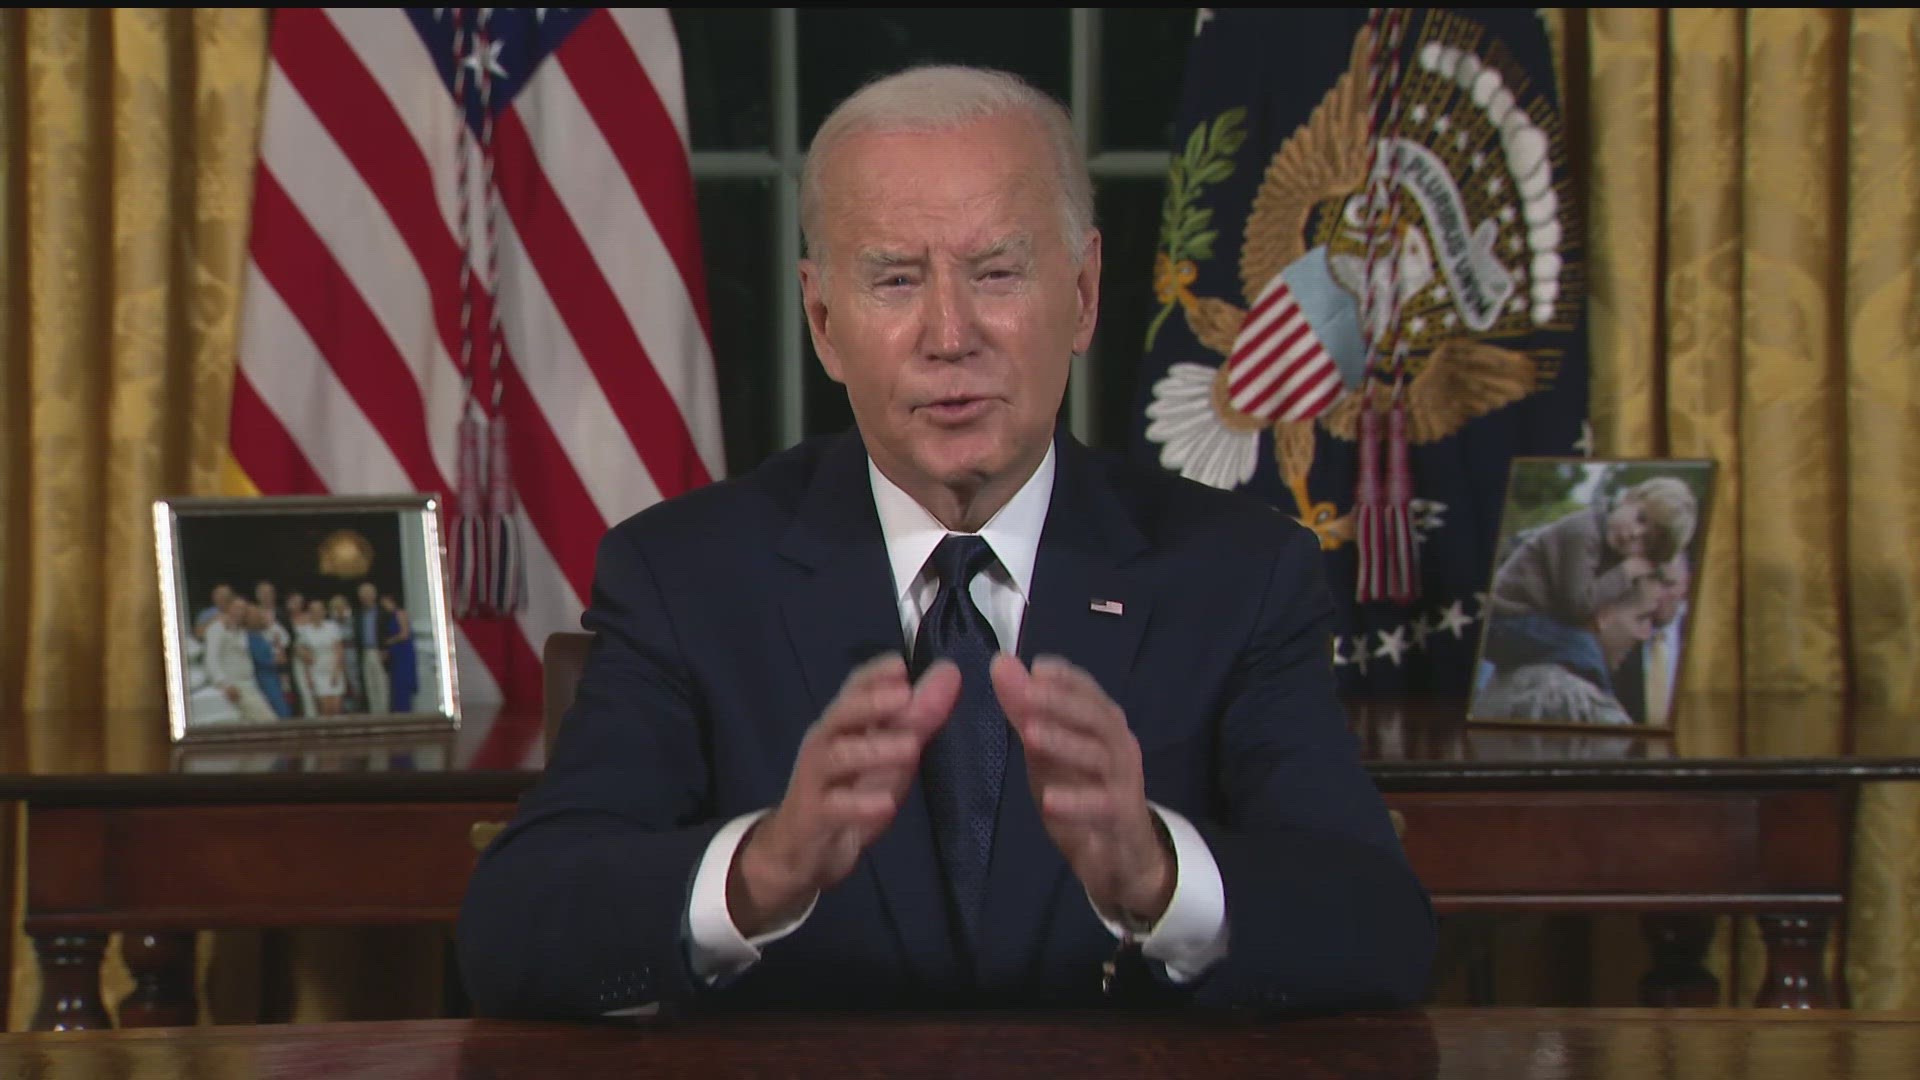 President Biden's speech was a plea to the American public to support military aid to U.S. allies, but Congress and world leaders were also paying close attention.